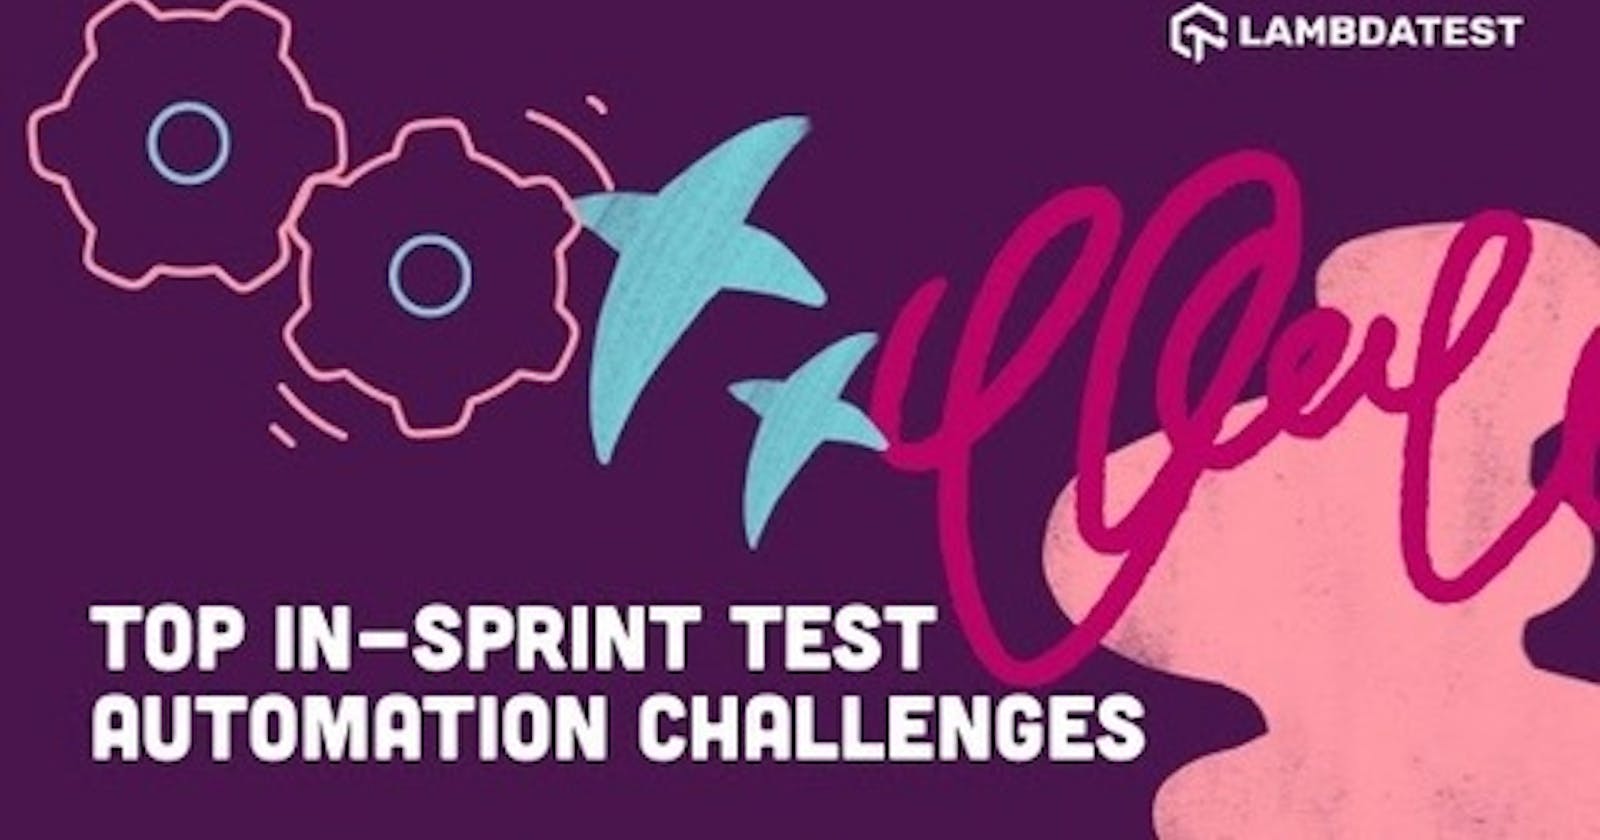 Overcoming Top Challenges With In-Sprint Test Automation